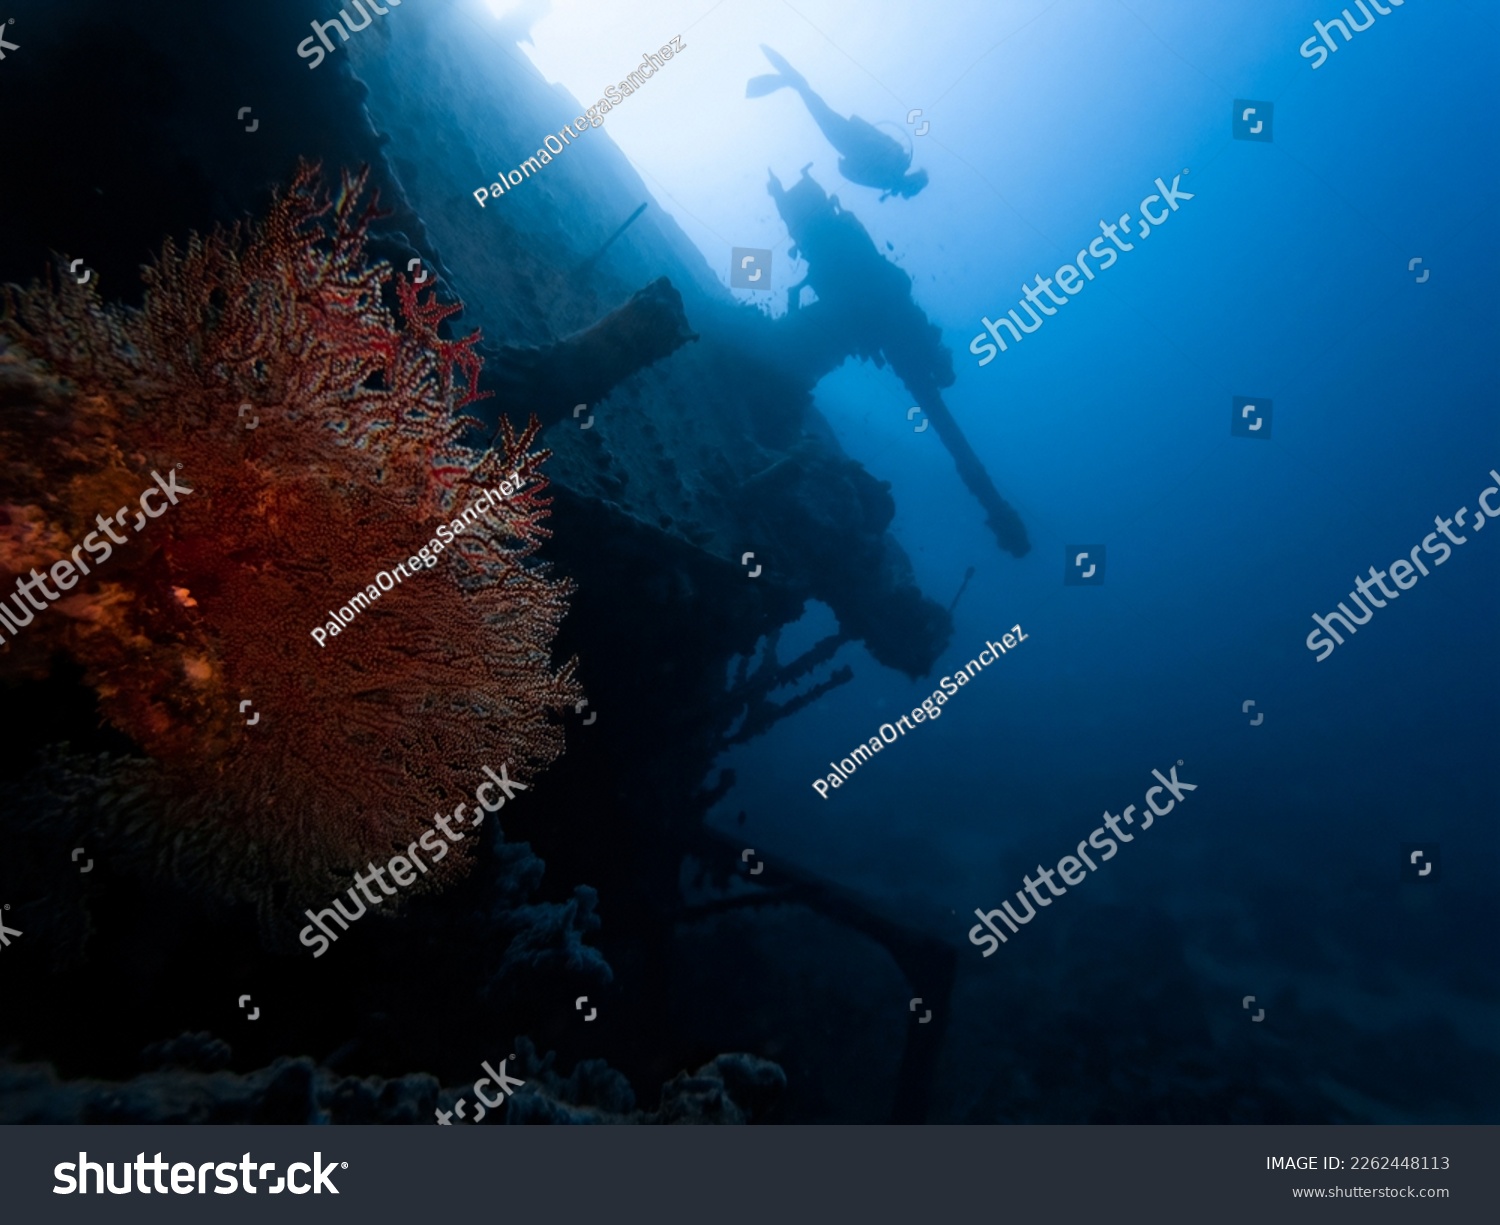 Hard coral on wreckage of the sunken Red Sea ship SS Thistlegorm. Diver over the large stern amthyereal cannon of the SS Thistlegorm. #2262448113